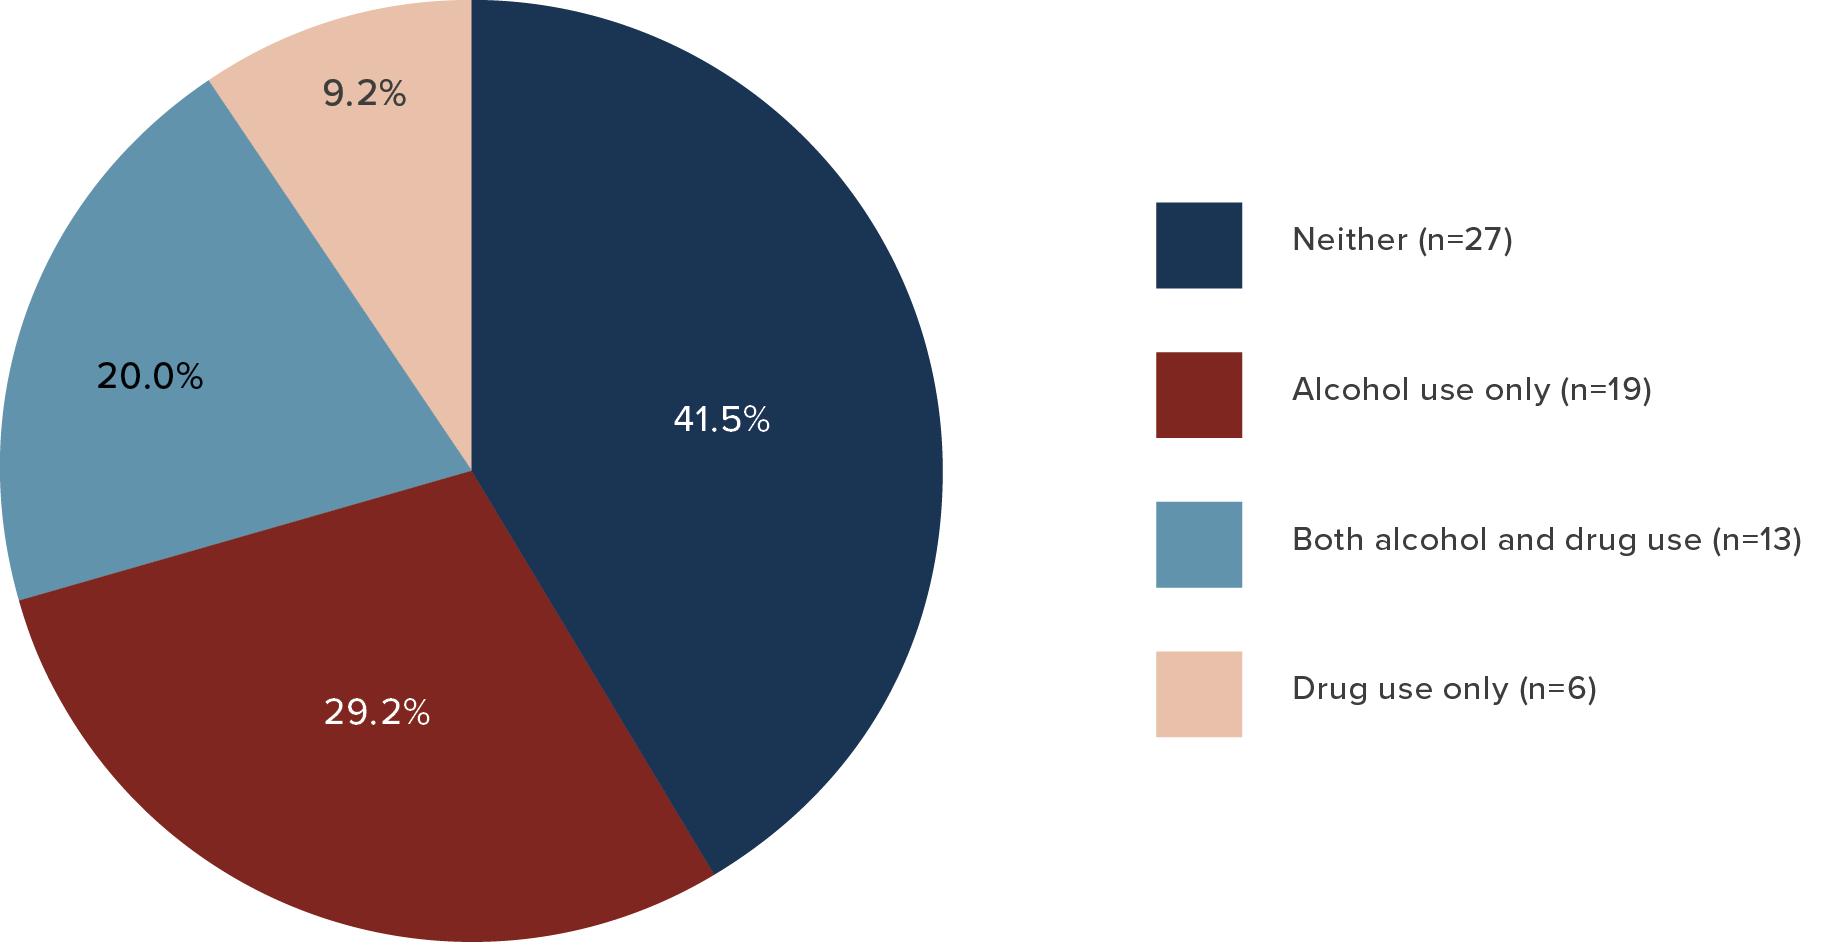 A Pie Chart with the following data: Neither (n=27): 41.5%. Alcohol use only (n=19): 29.2%. Both alcohol and drug use (n=13): 20.0%. Drug use only (n=16): 9.2%. 